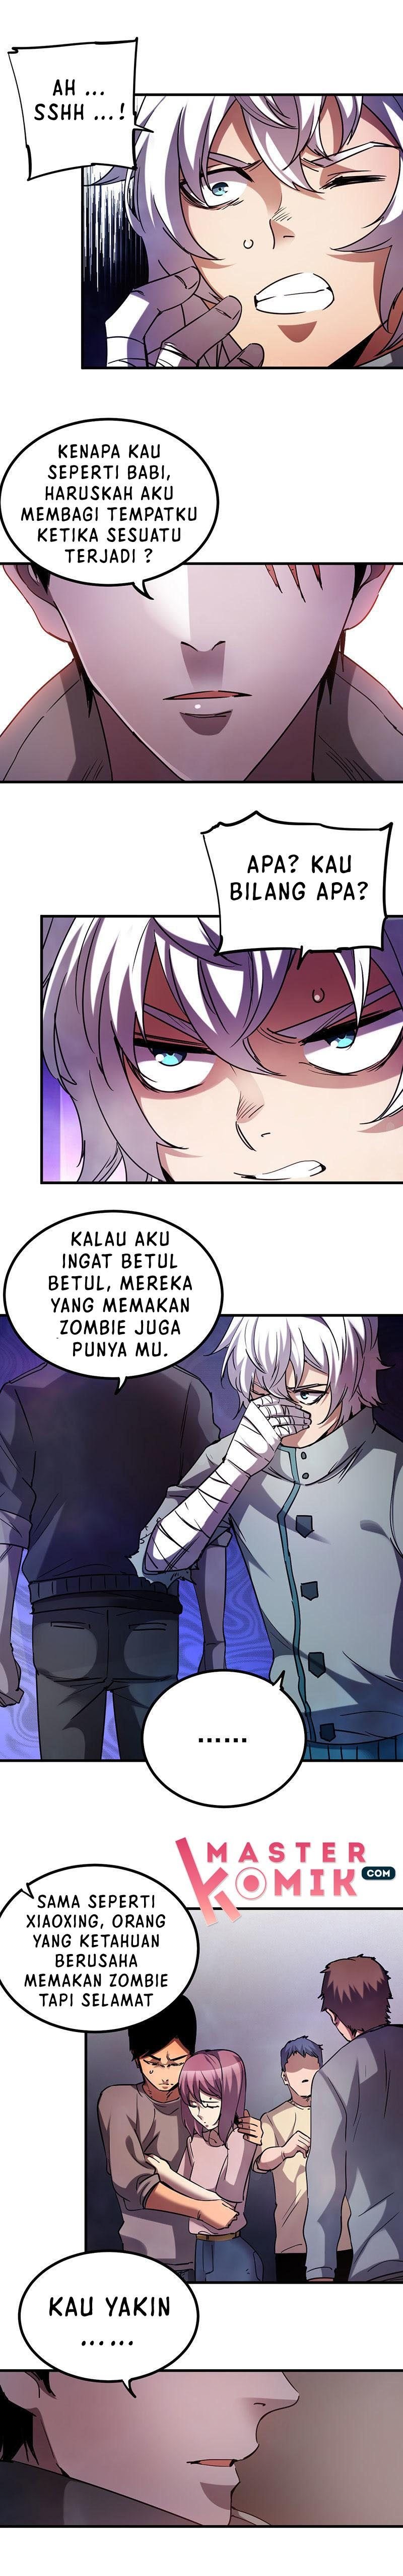 Strongest Evolution Of Zombie Chapter 34